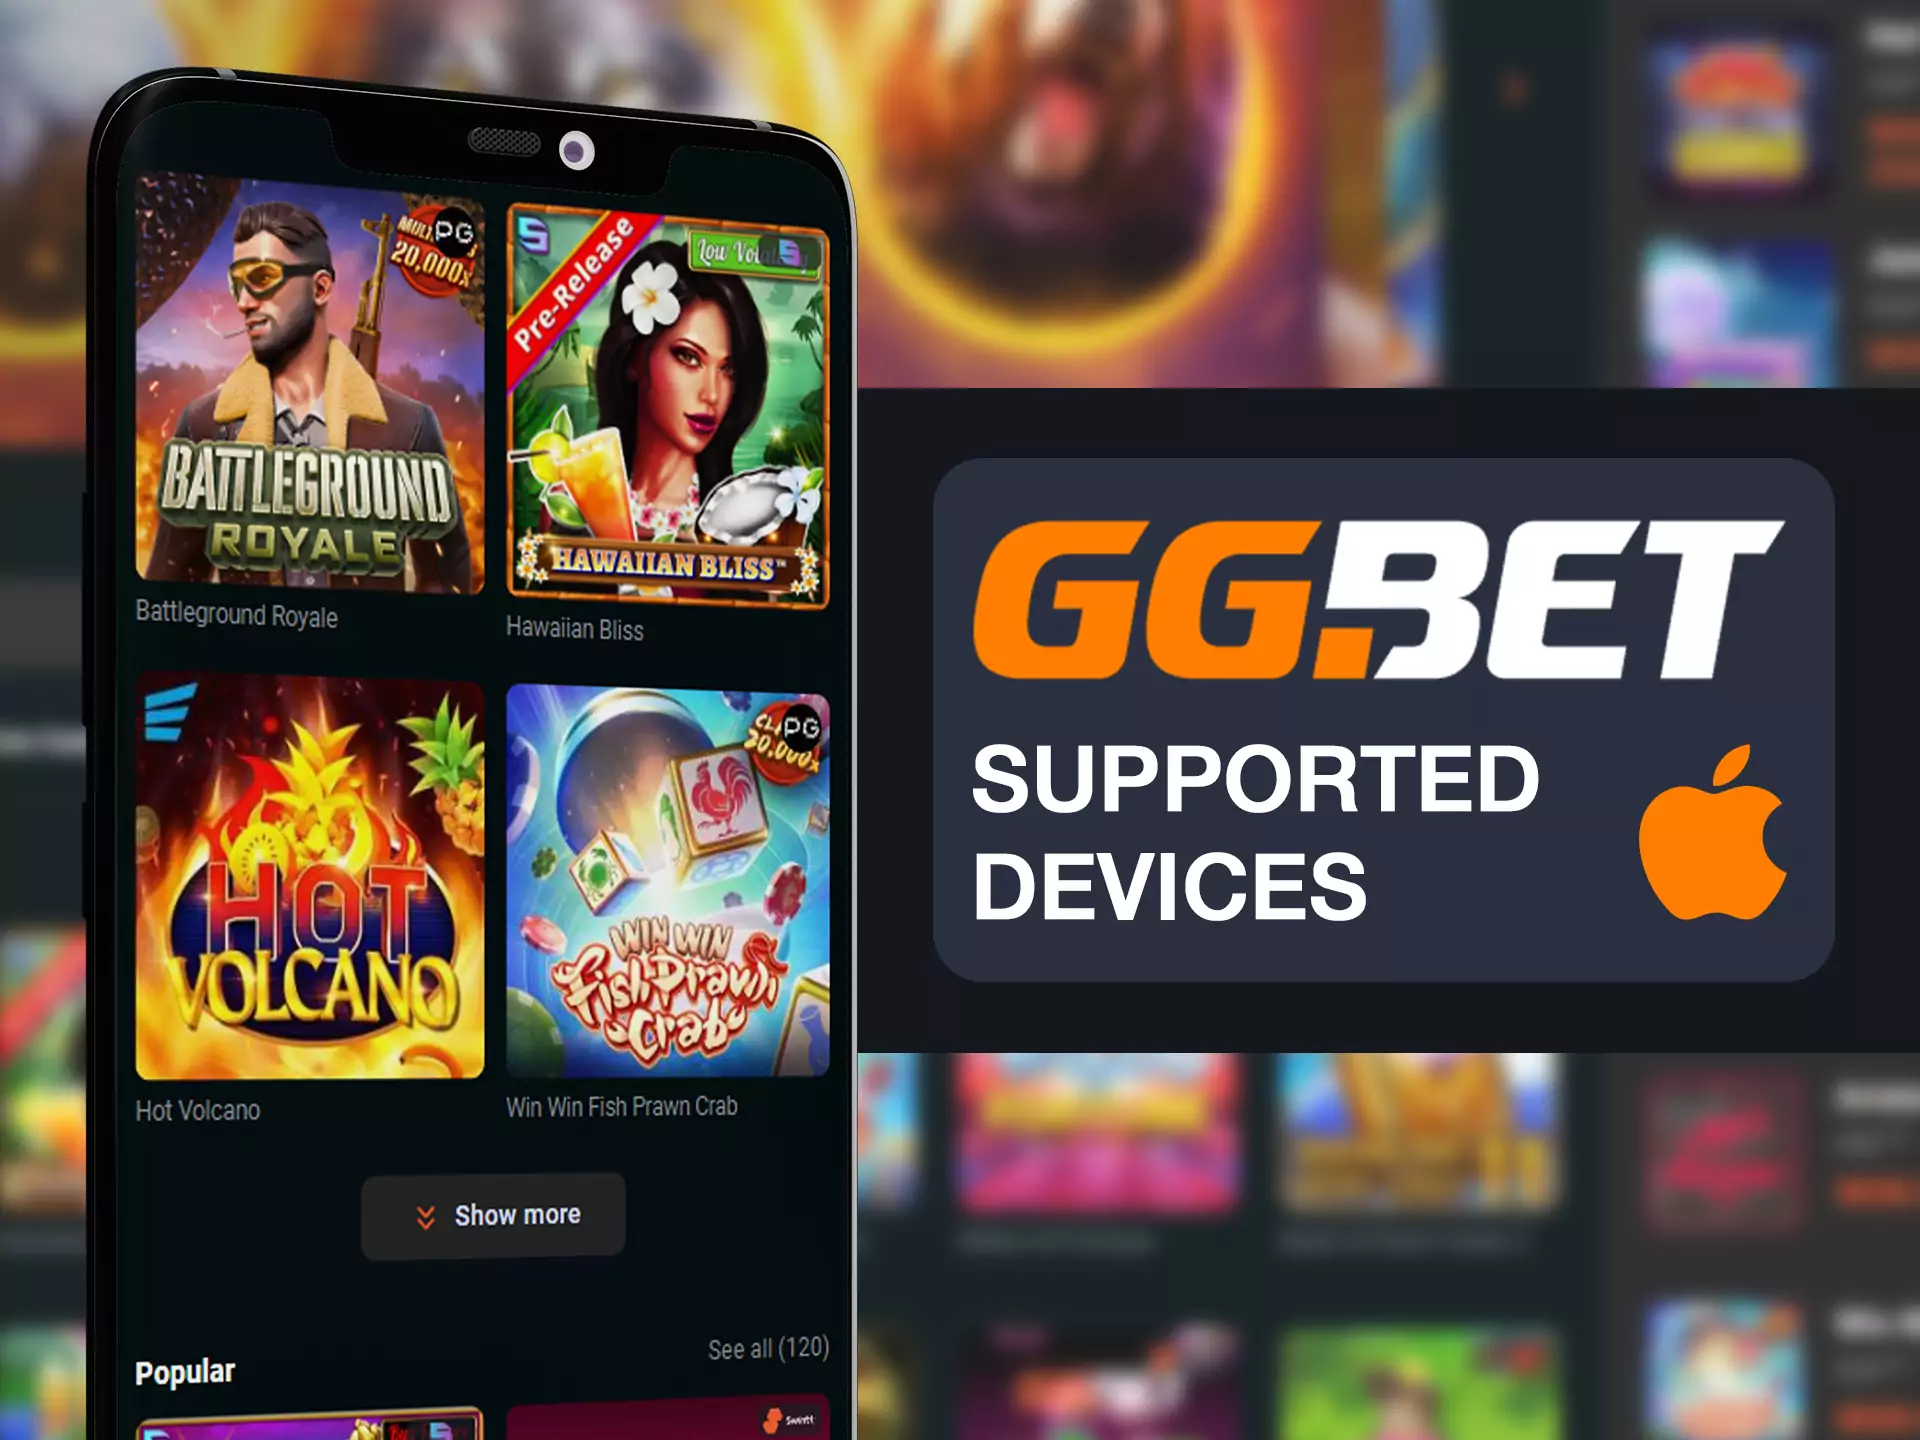 Install GGBet on all of your ios devices.